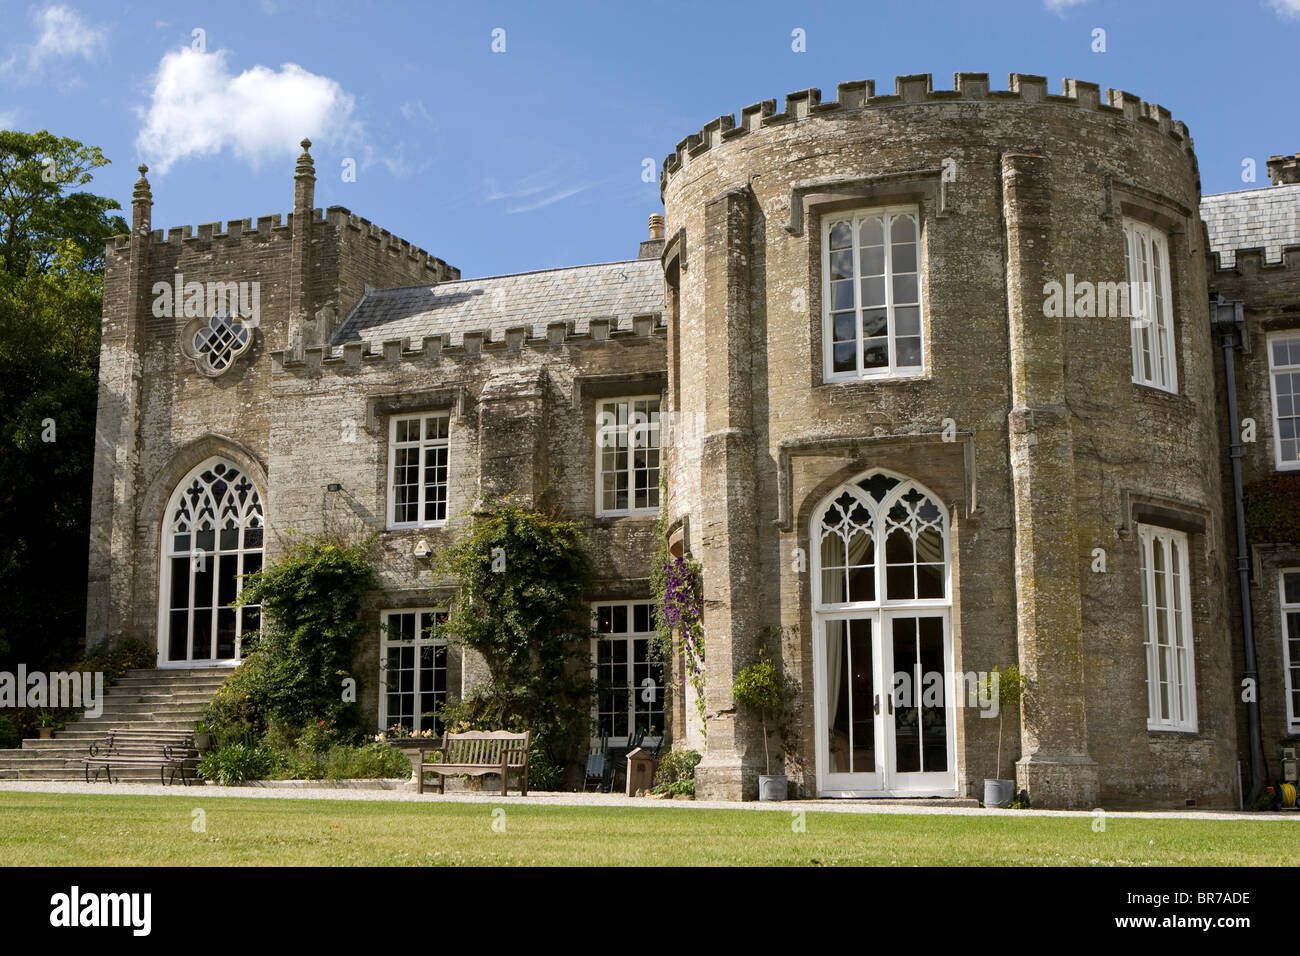 Prideaux Place near Padstow, Cornwall. Stock Photo